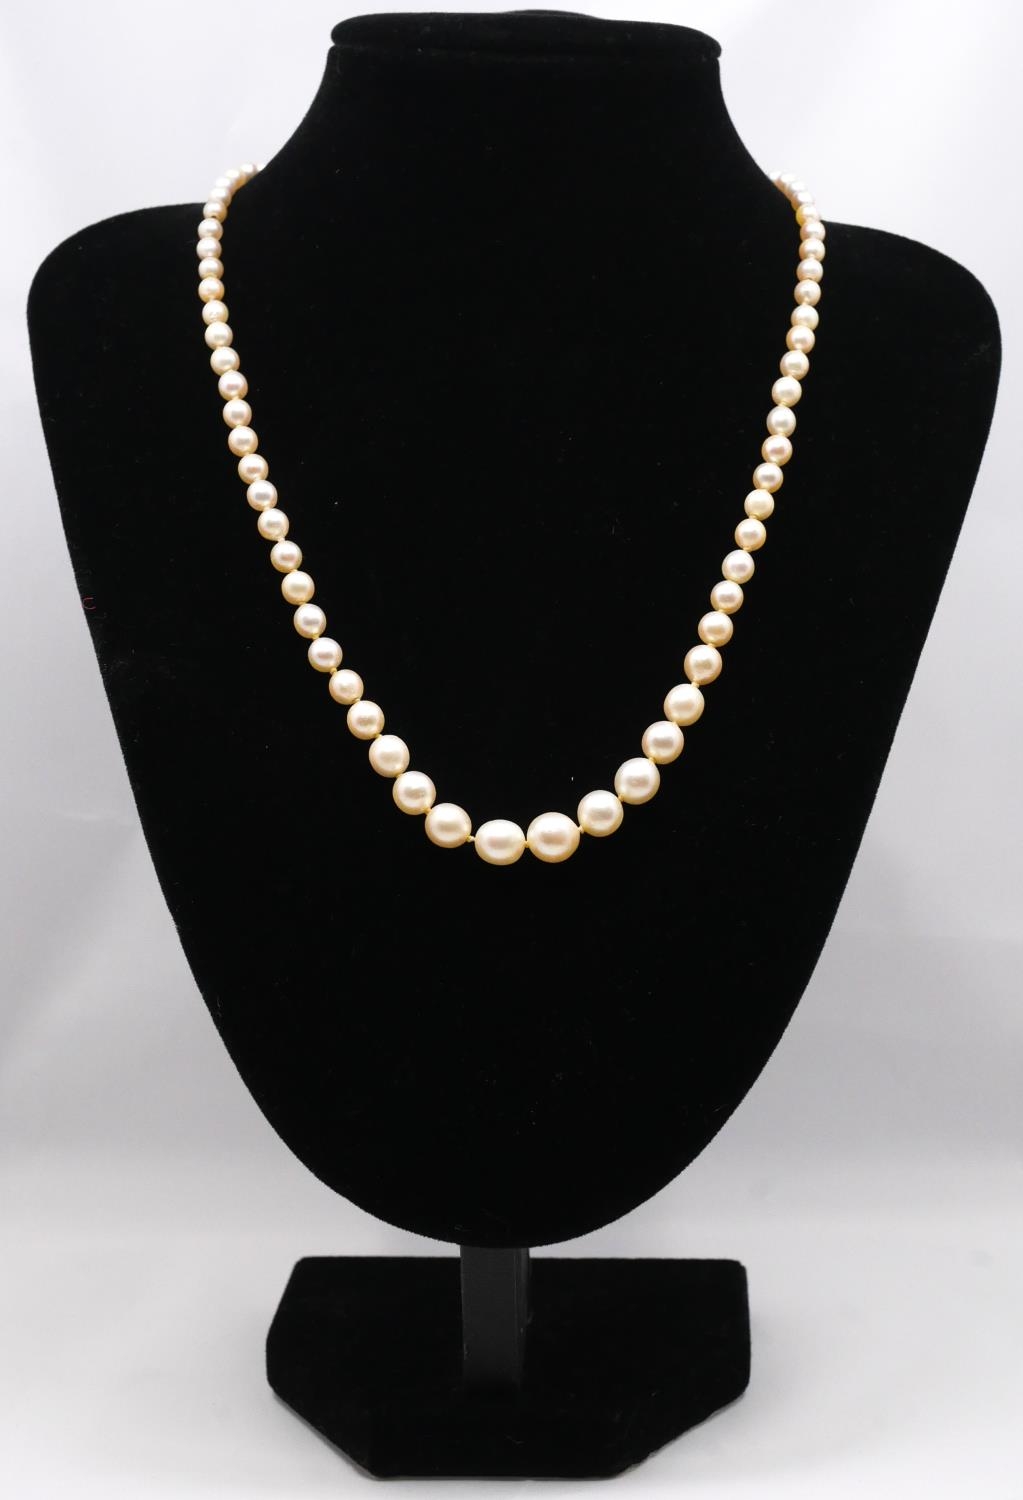 A 18 inch graduated and knotted cultured pearl necklace with 9 carat white gold clasp. Largest pearl - Image 2 of 6